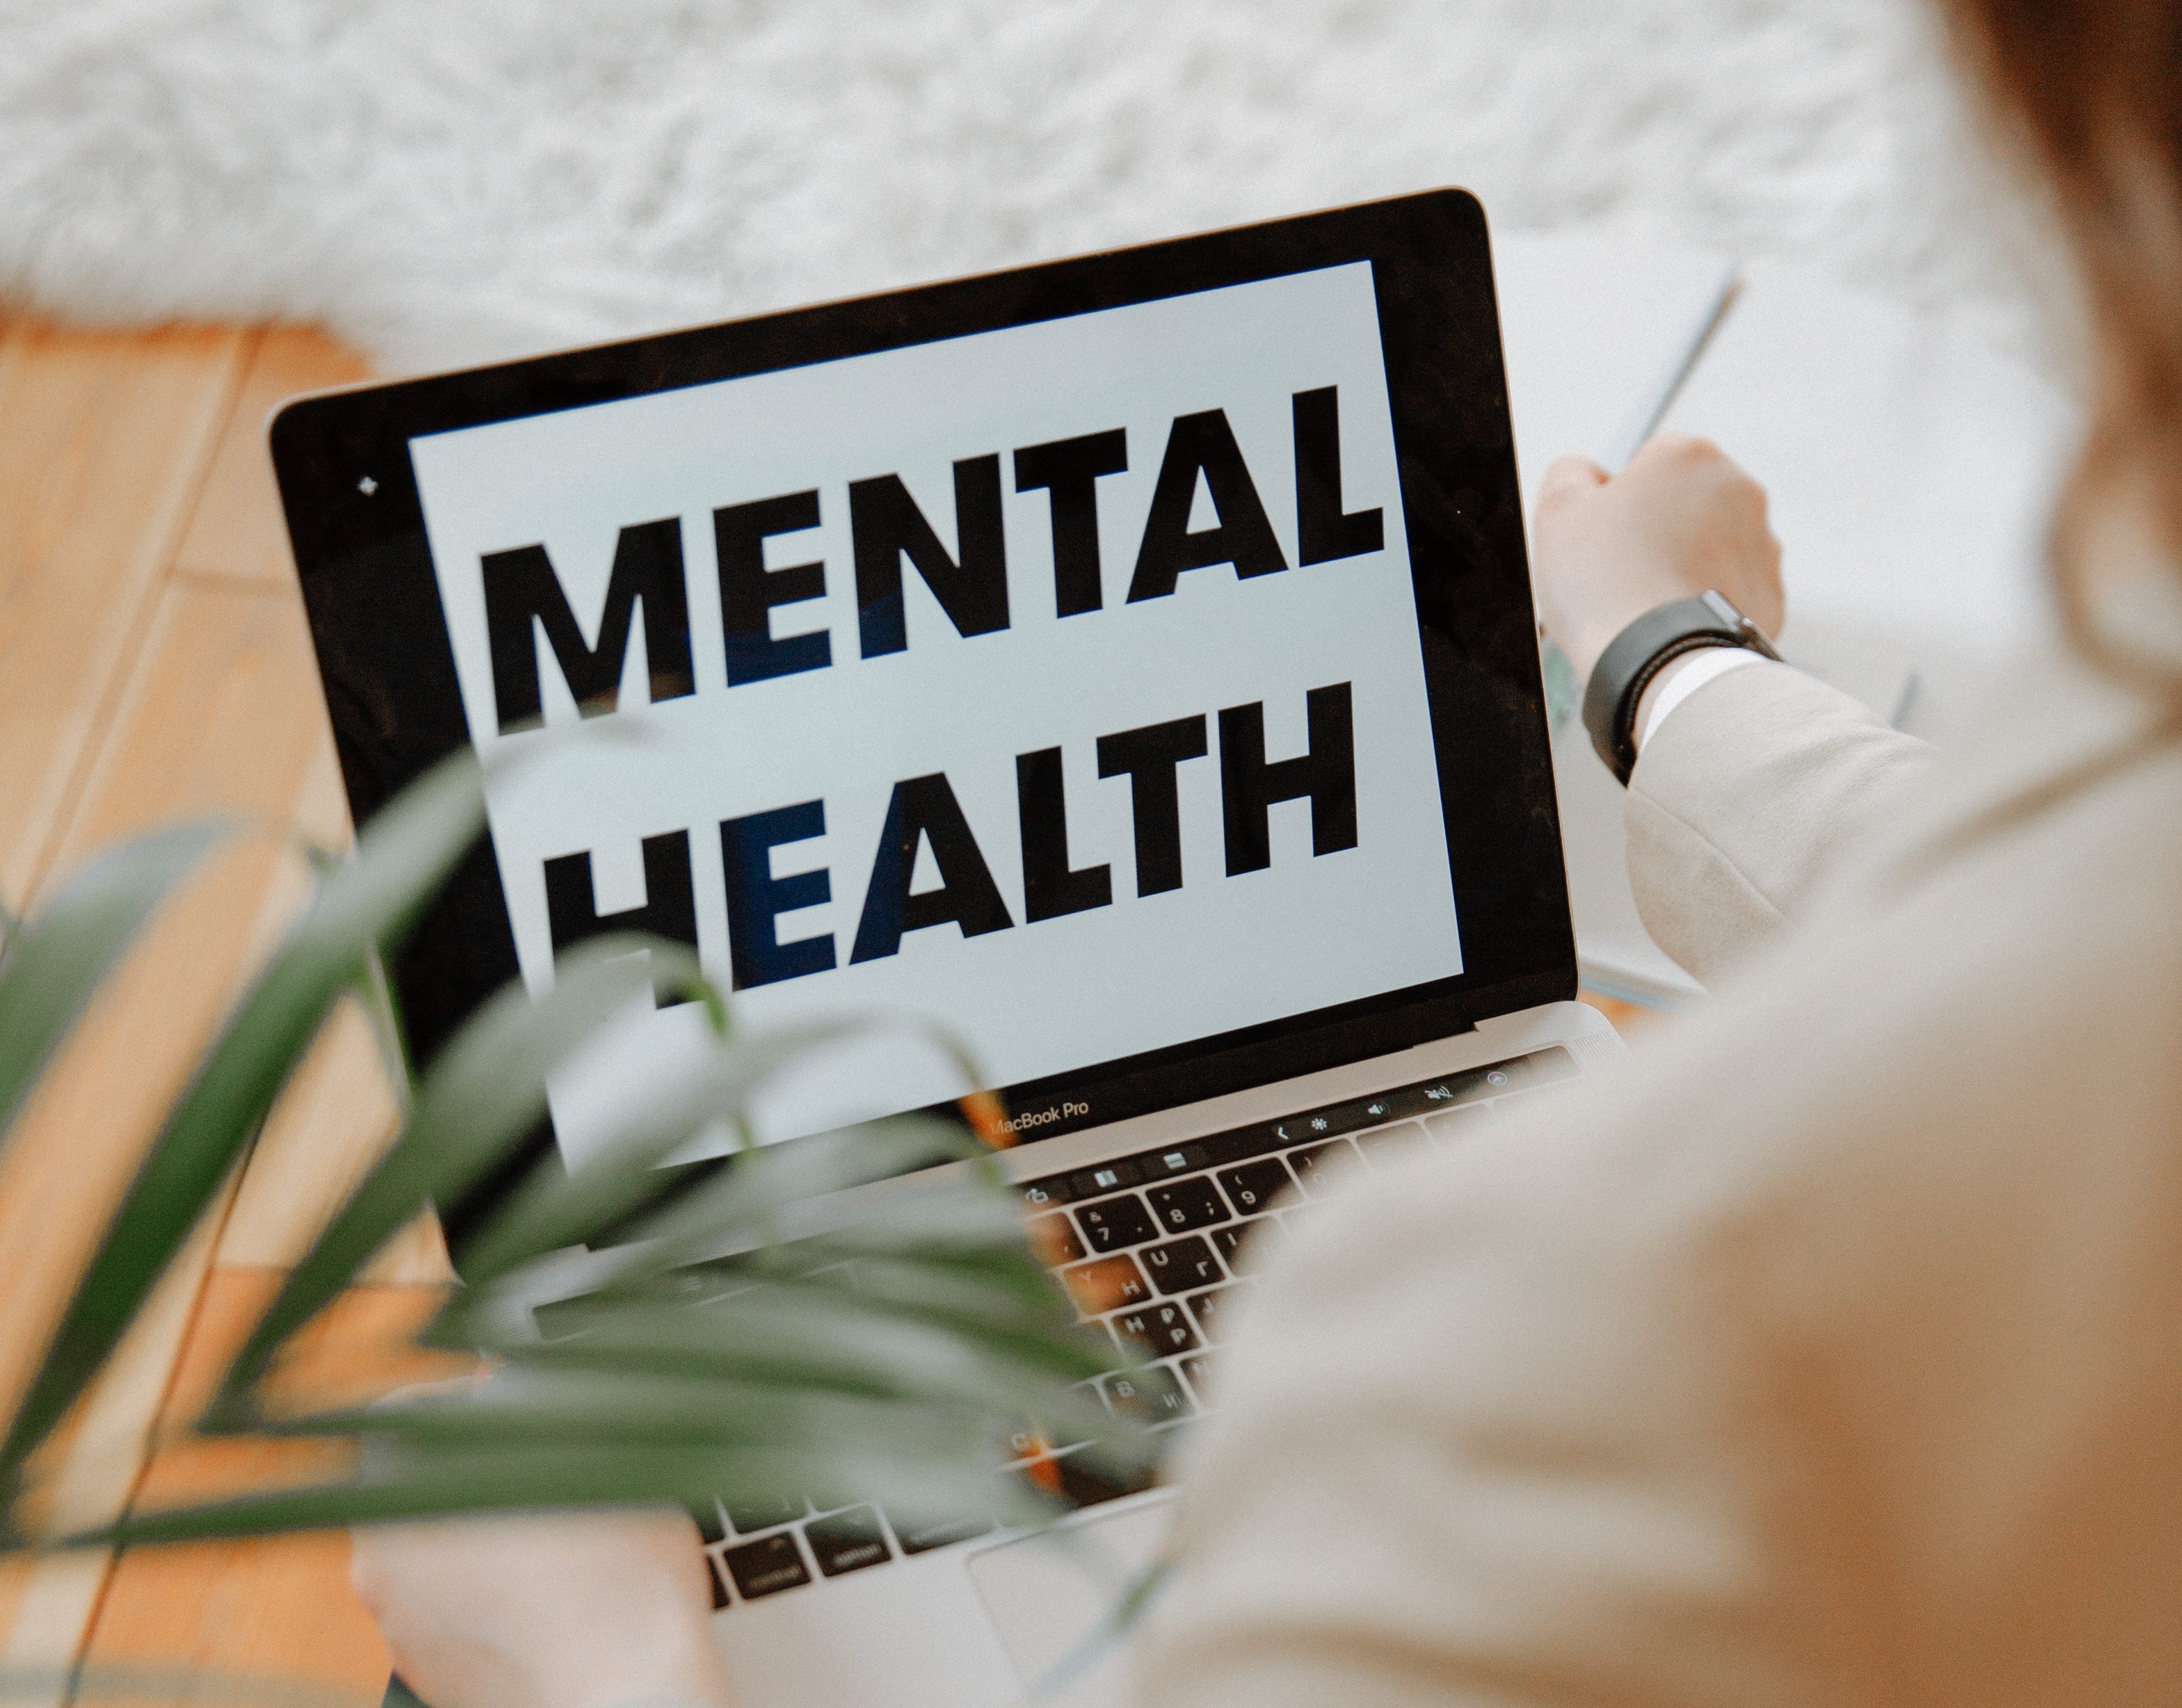 Image shows the top of a laptop with the words "Mental Health" written on it and viewed over the shoulder of the user who is out of focus.